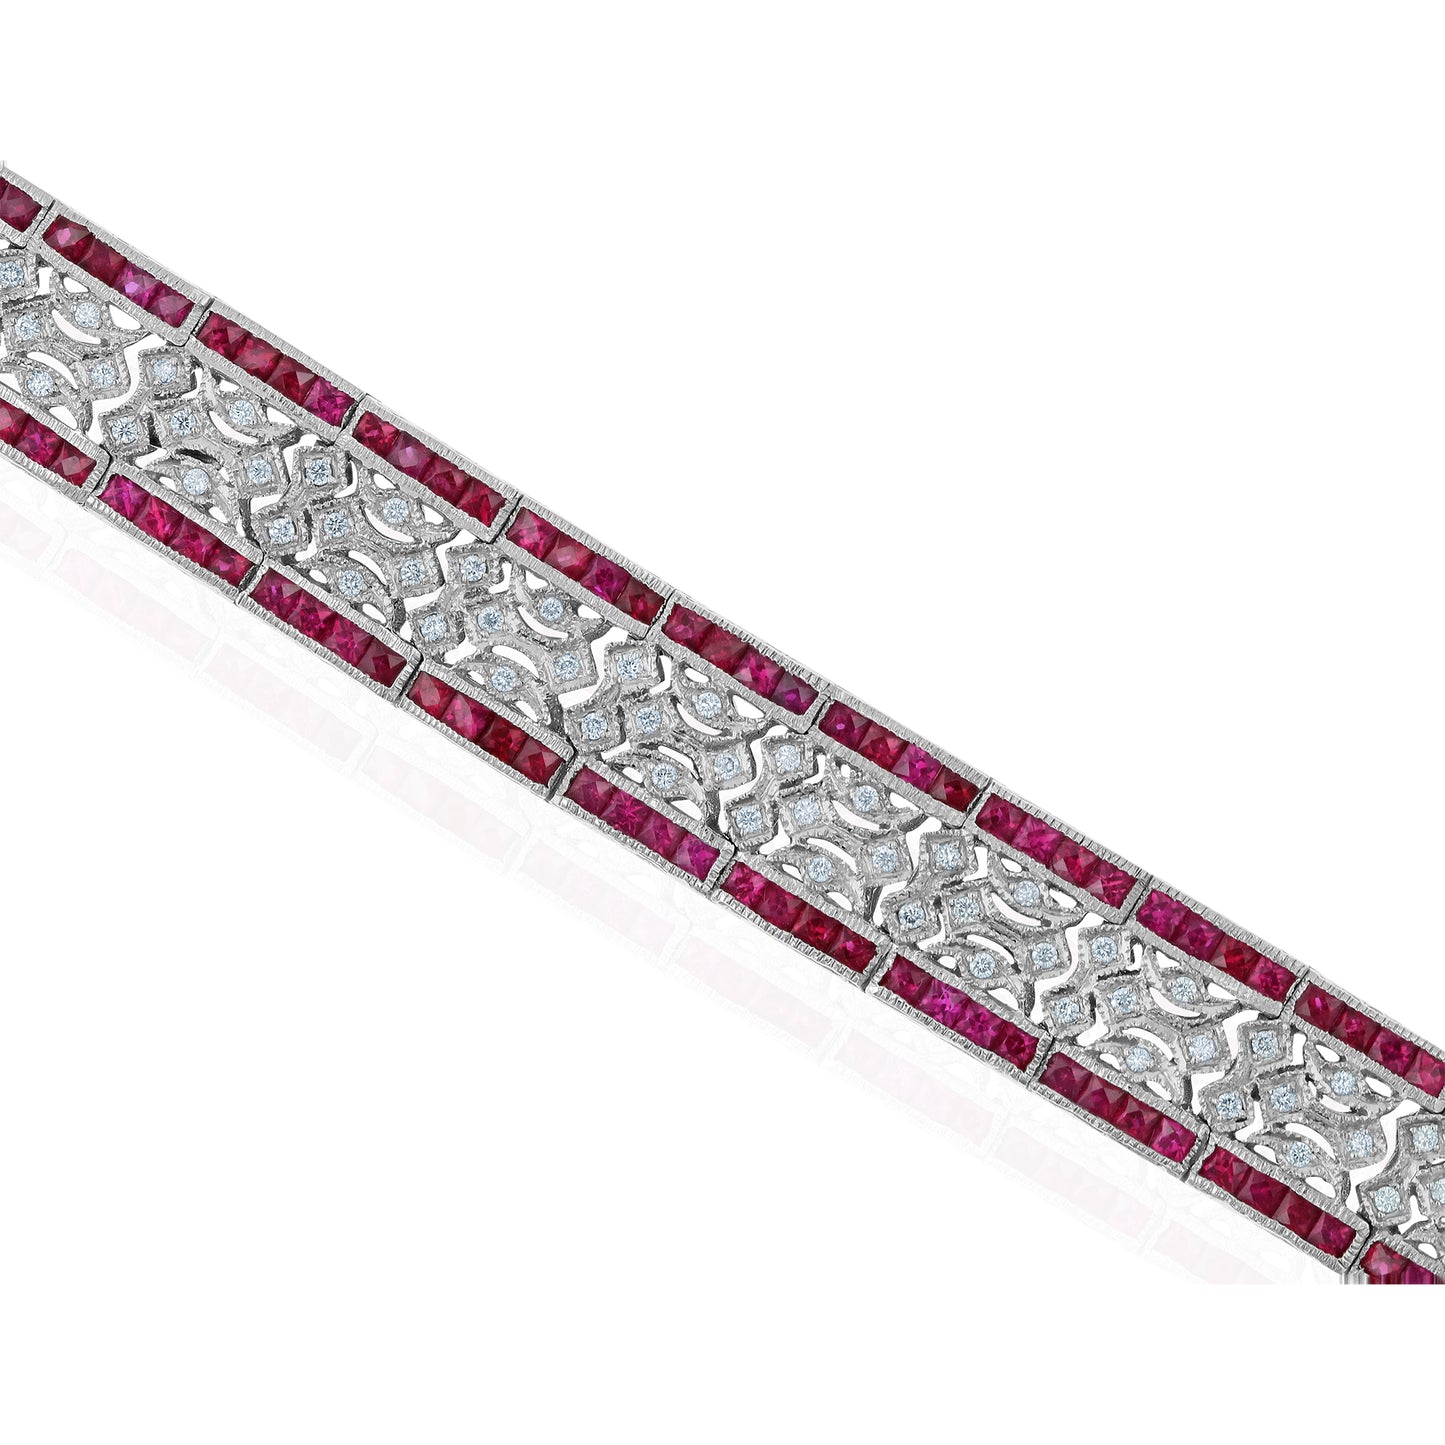 Natural Rubies 11 Carats Set in 18K White Gold and Diamond French Style Bracelet